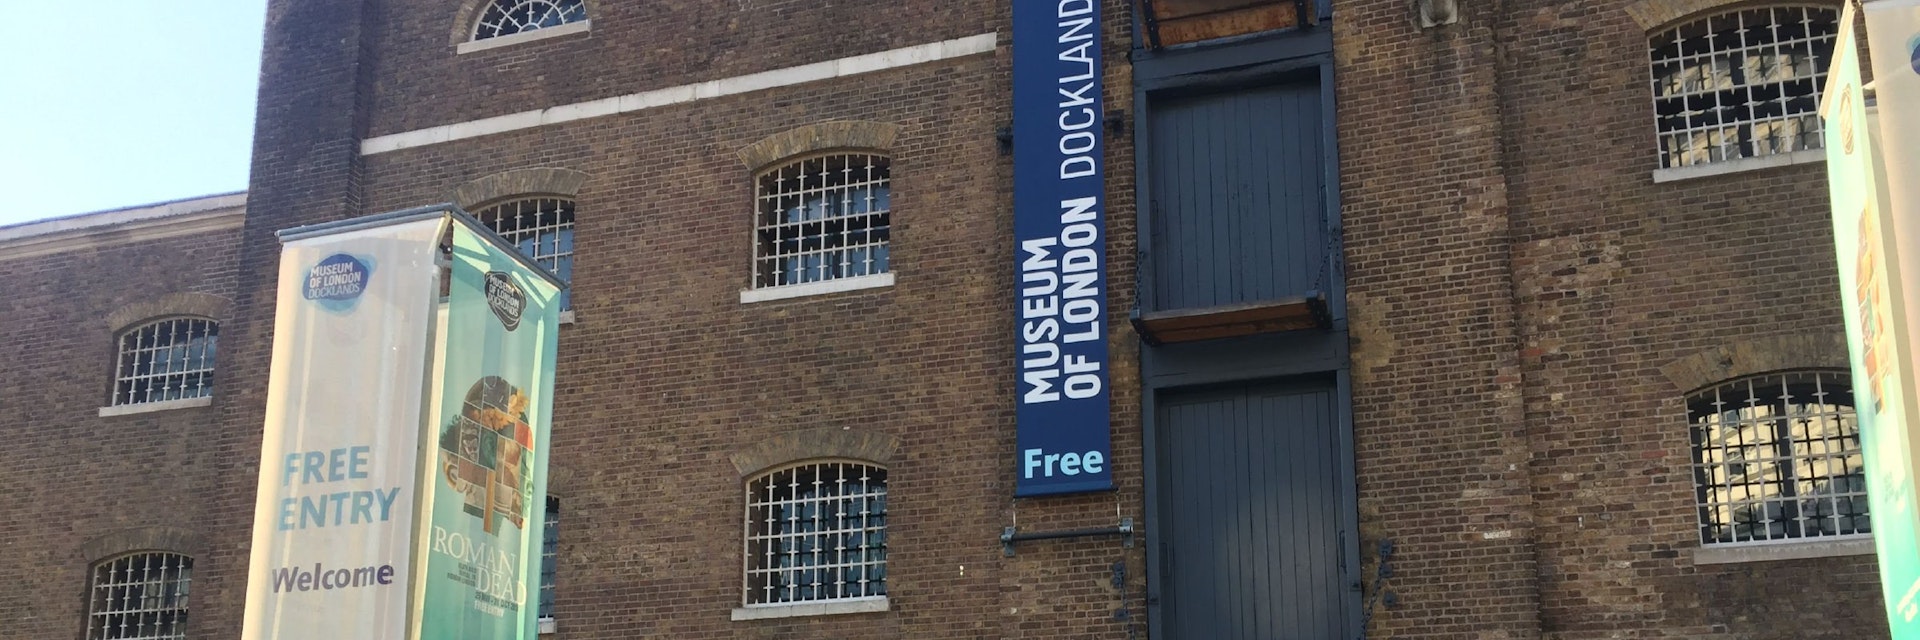 Museum of London Docklands exterior